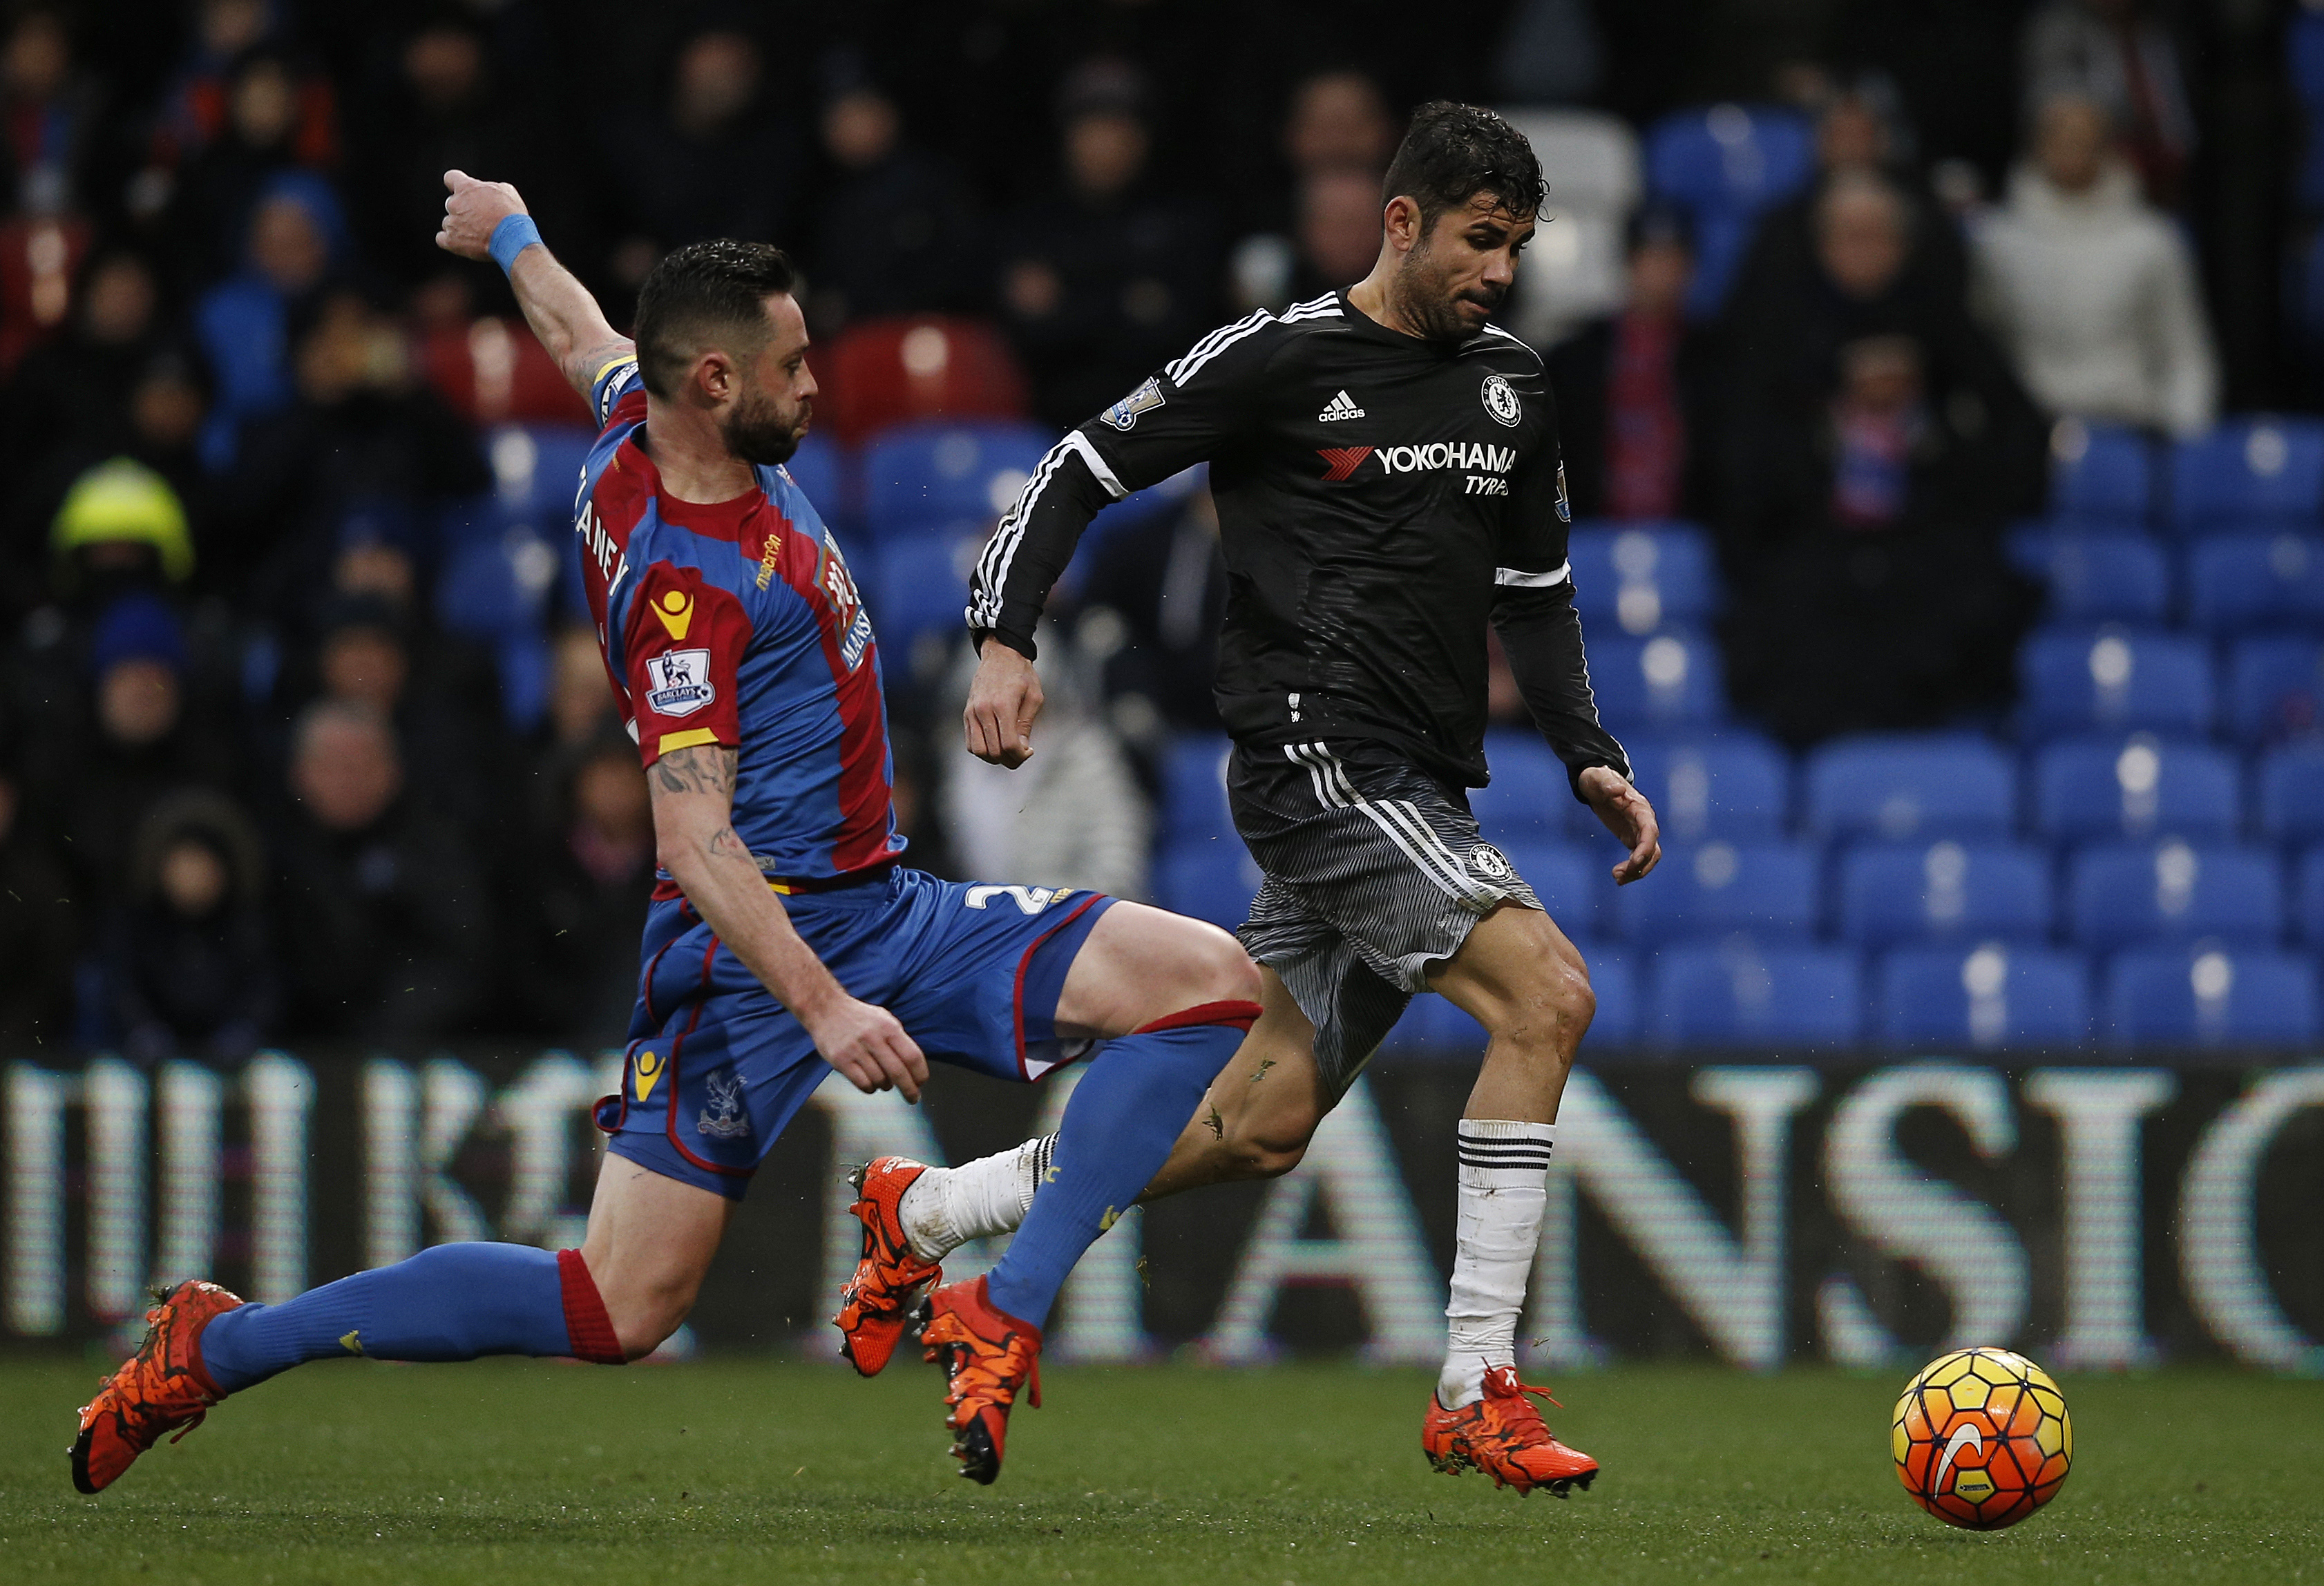 Crystal Palace's Irish defender Damien Delaney (L) jumps to clear the ball from the path of Chelsea's Brazilian-born Spanish striker Diego Costa as he makes a run on goal during the English Premier League football match between Crystal Palace and Chelsea at Selhurst Park in south London on January 3, 2016. AFP PHOTO / ADRIAN DENNIS

RESTRICTED TO EDITORIAL USE. NO USE WITH UNAUTHORIZED AUDIO, VIDEO, DATA, FIXTURE LISTS, CLUB/LEAGUE LOGOS OR 'LIVE' SERVICES. ONLINE IN-MATCH USE LIMITED TO 75 IMAGES, NO VIDEO EMULATION. NO USE IN BETTING, GAMES OR SINGLE CLUB/LEAGUE/PLAYER PUBLICATIONS. / AFP / ADRIAN DENNIS        (Photo credit should read ADRIAN DENNIS/AFP/Getty Images)